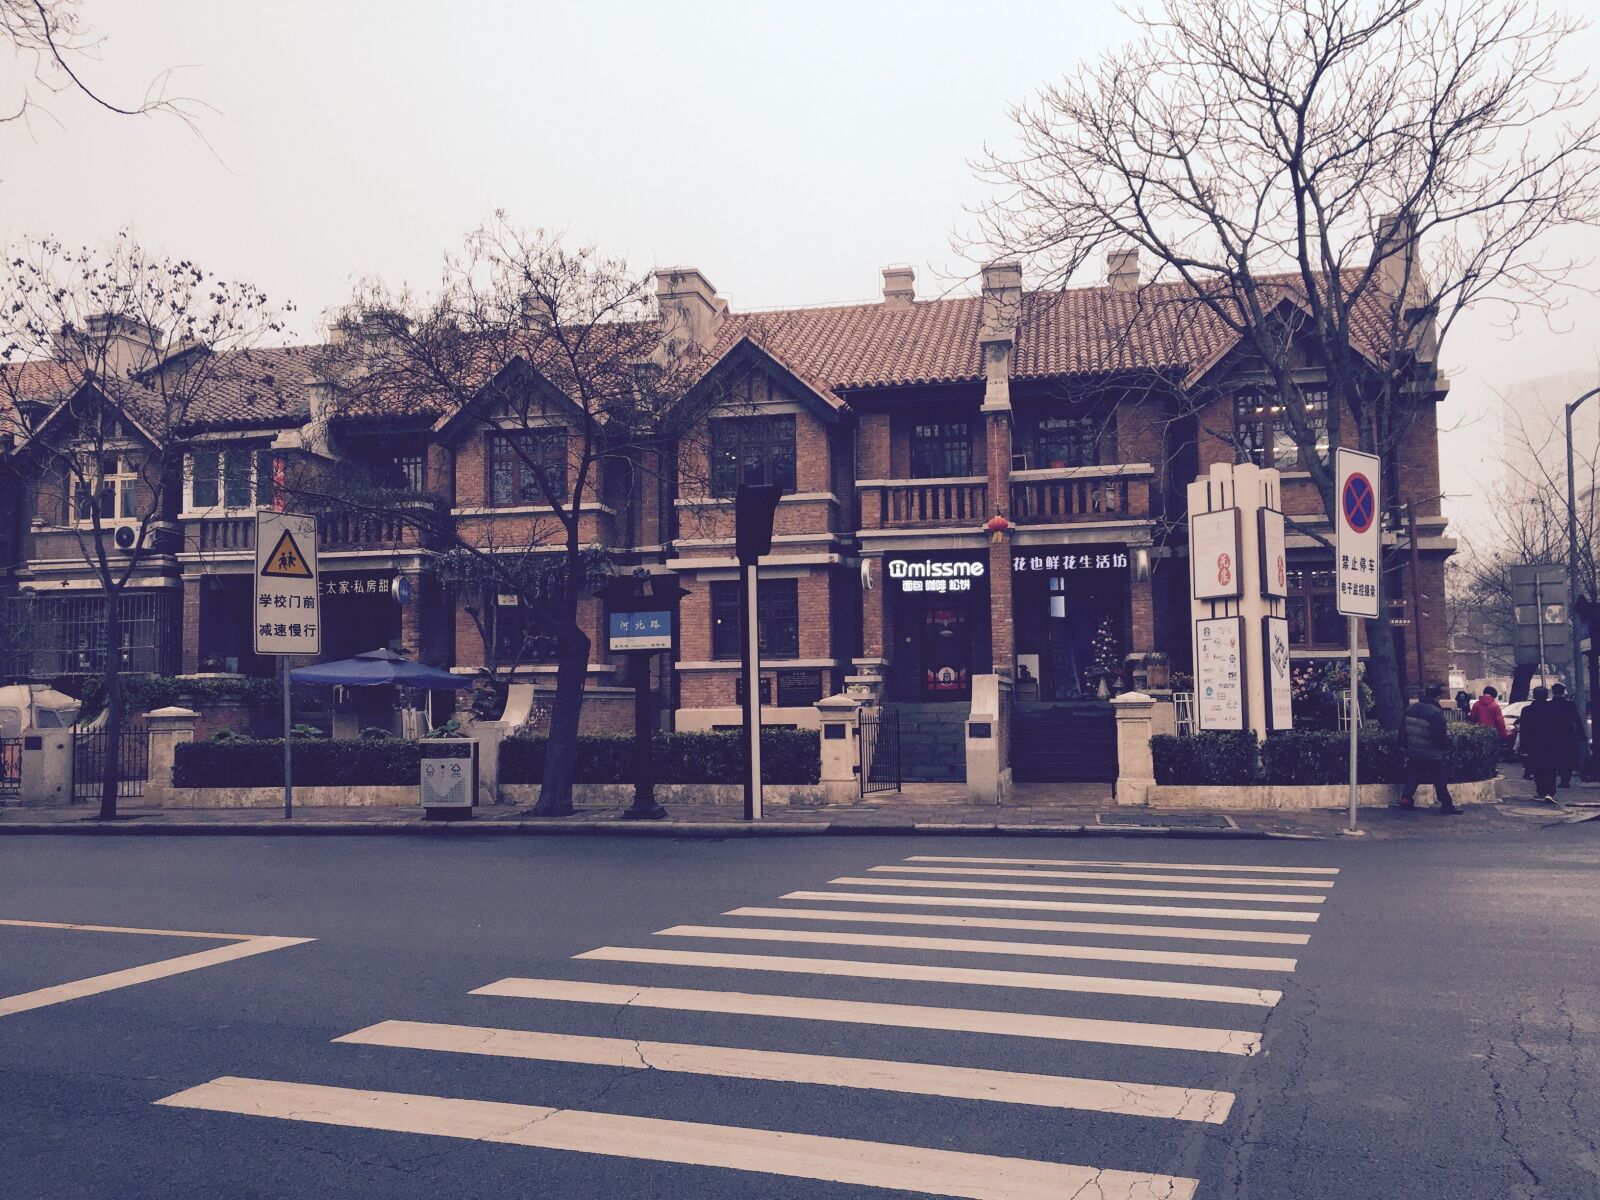 Apple iPhone 6 sample photo. Old house, tianjin, china photography